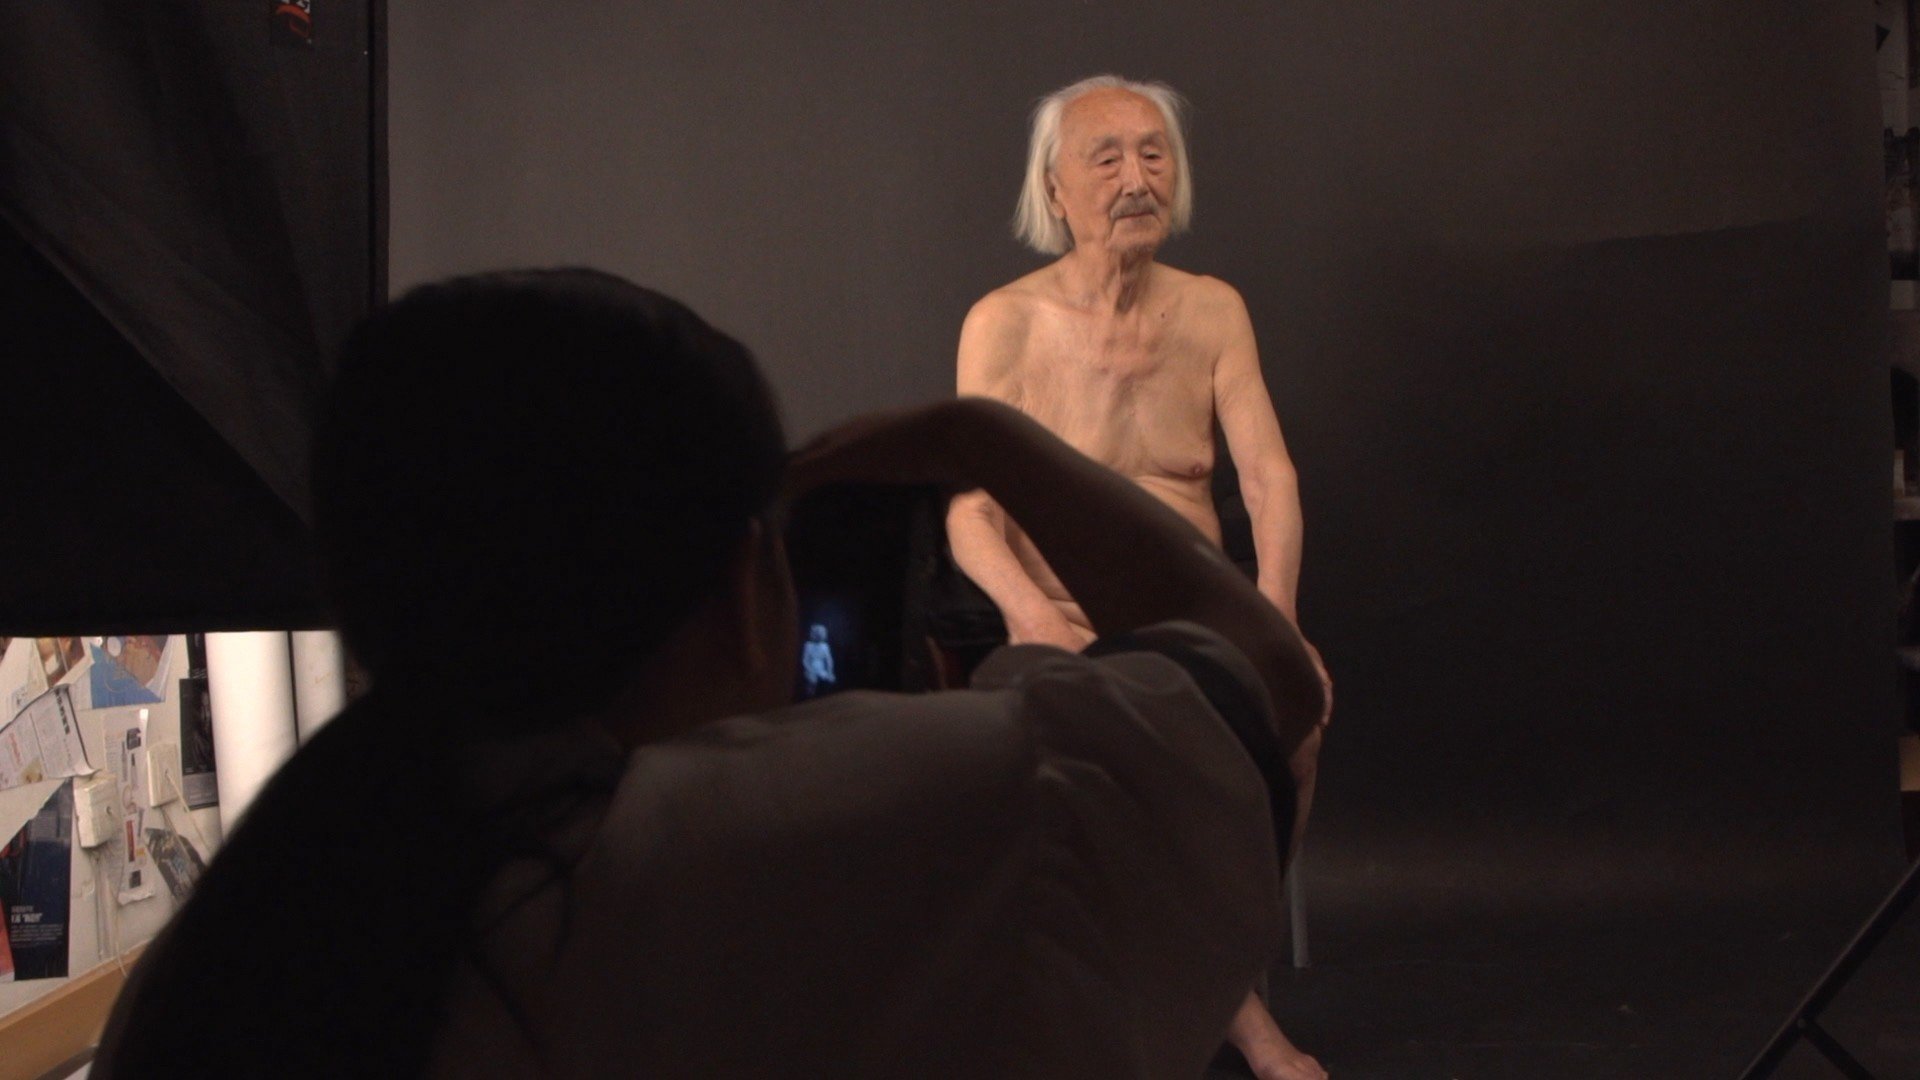 Around twice a week, this elderly Chinese man poses as a nude model.